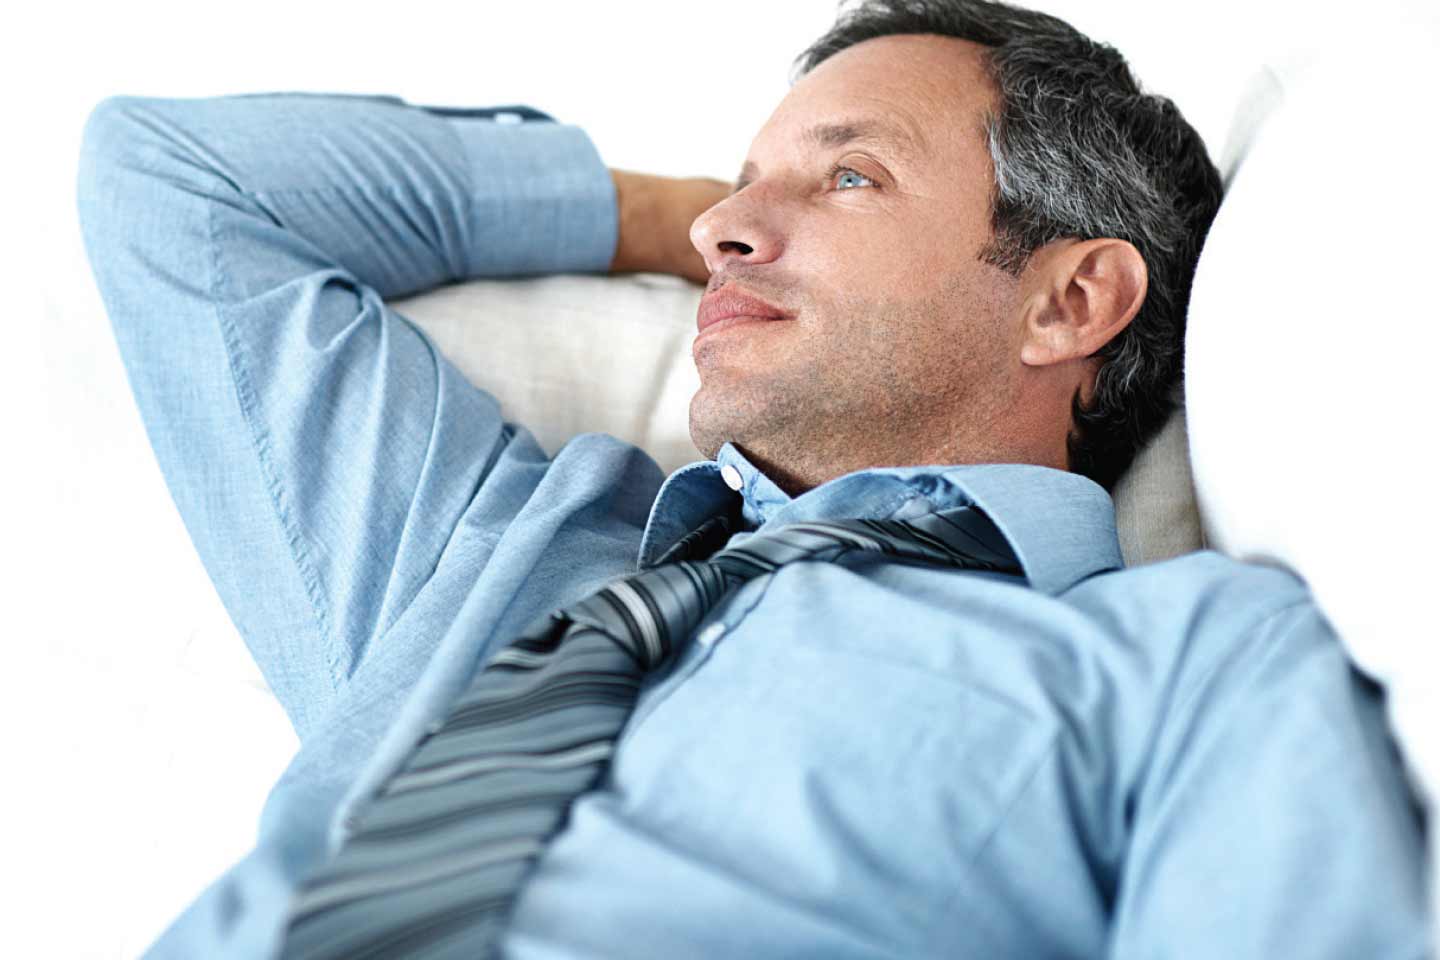 Man lying down on couch